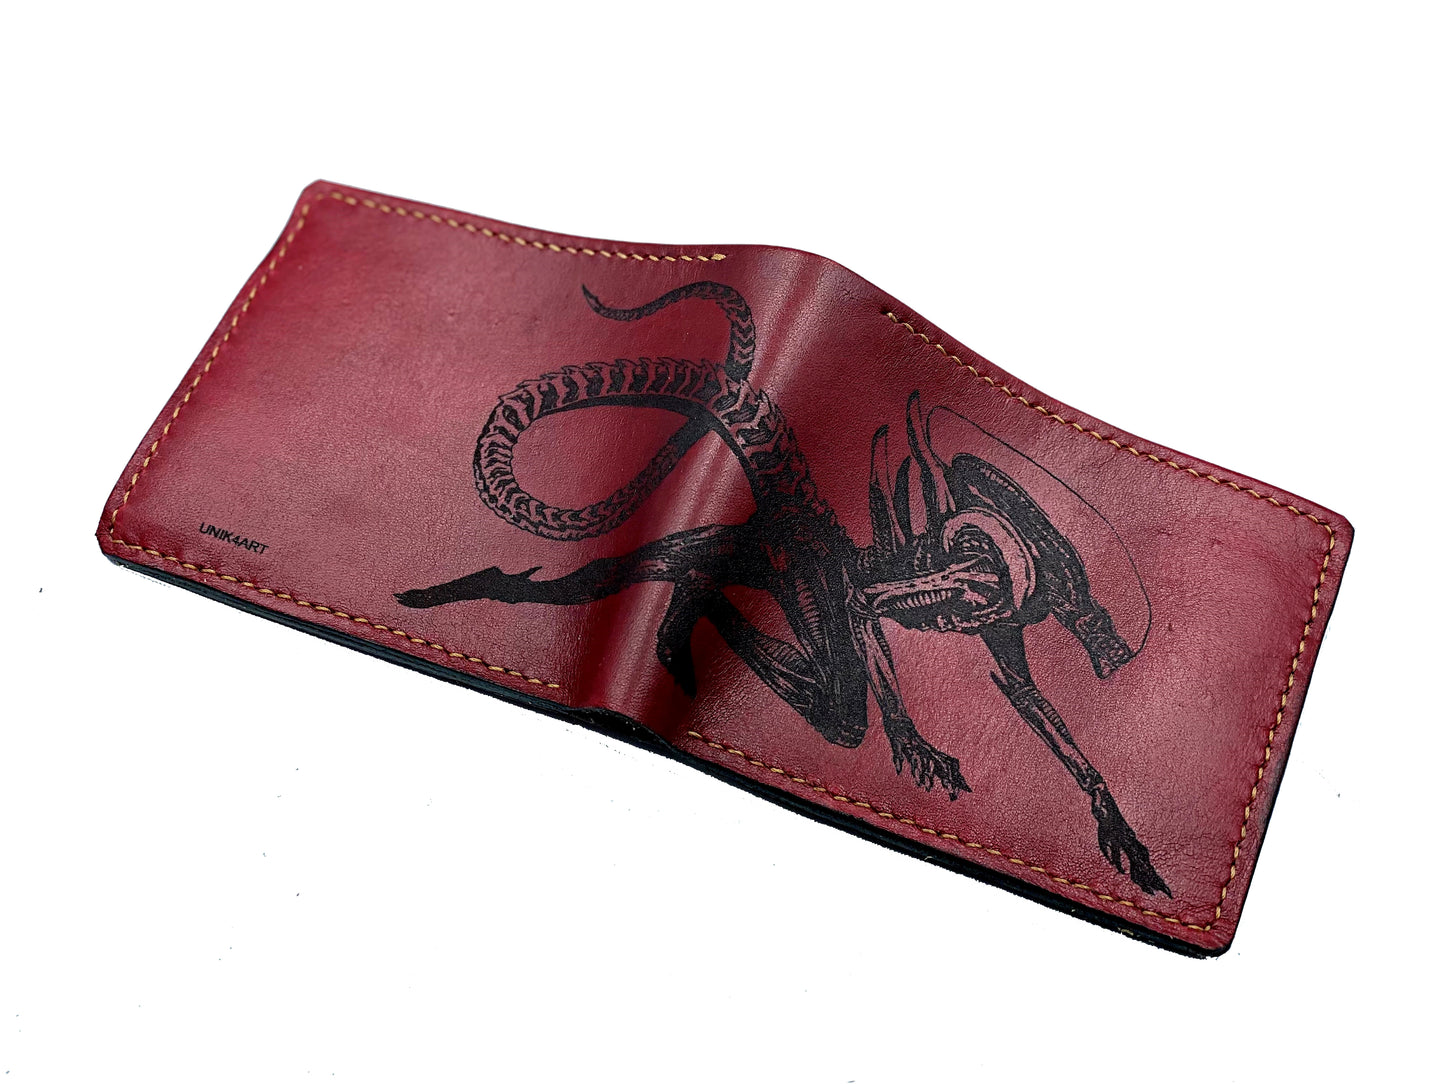 Mayan Corner - Aliens xenomorph monster leather handmade men's wallet, custom gifts for him, father's day gifts, anniversary gift for men